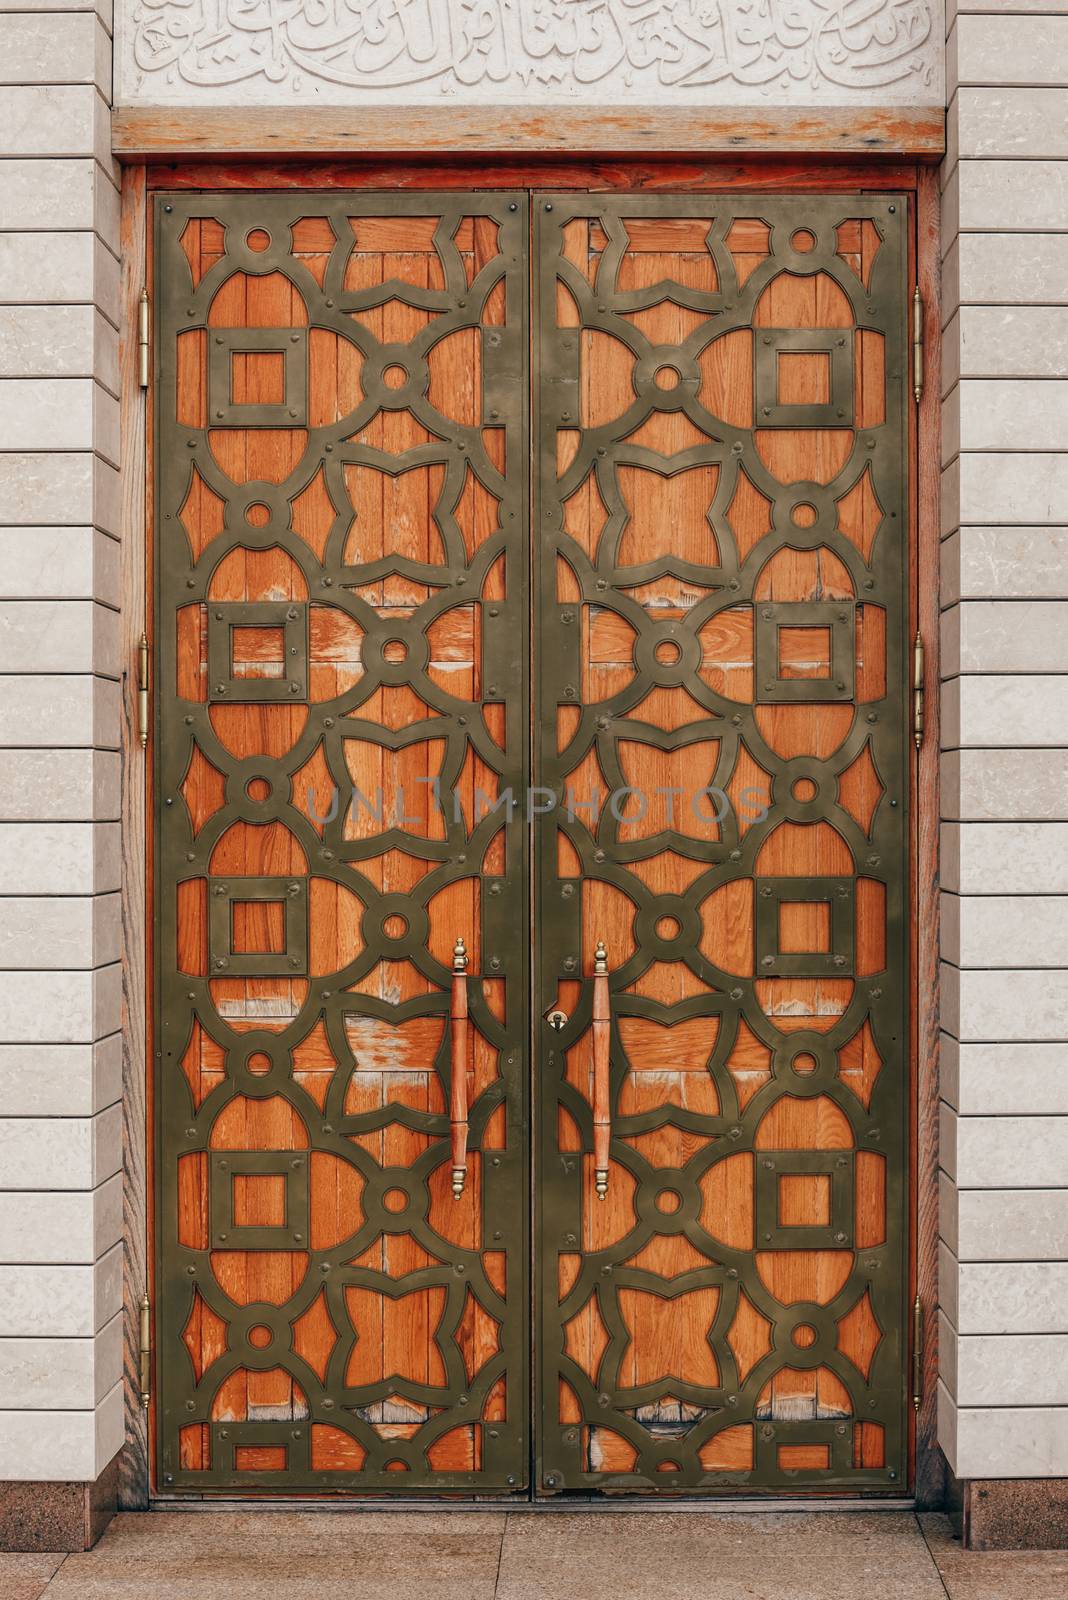 Background of Wooden Door Decorated with Oriental Ornament.